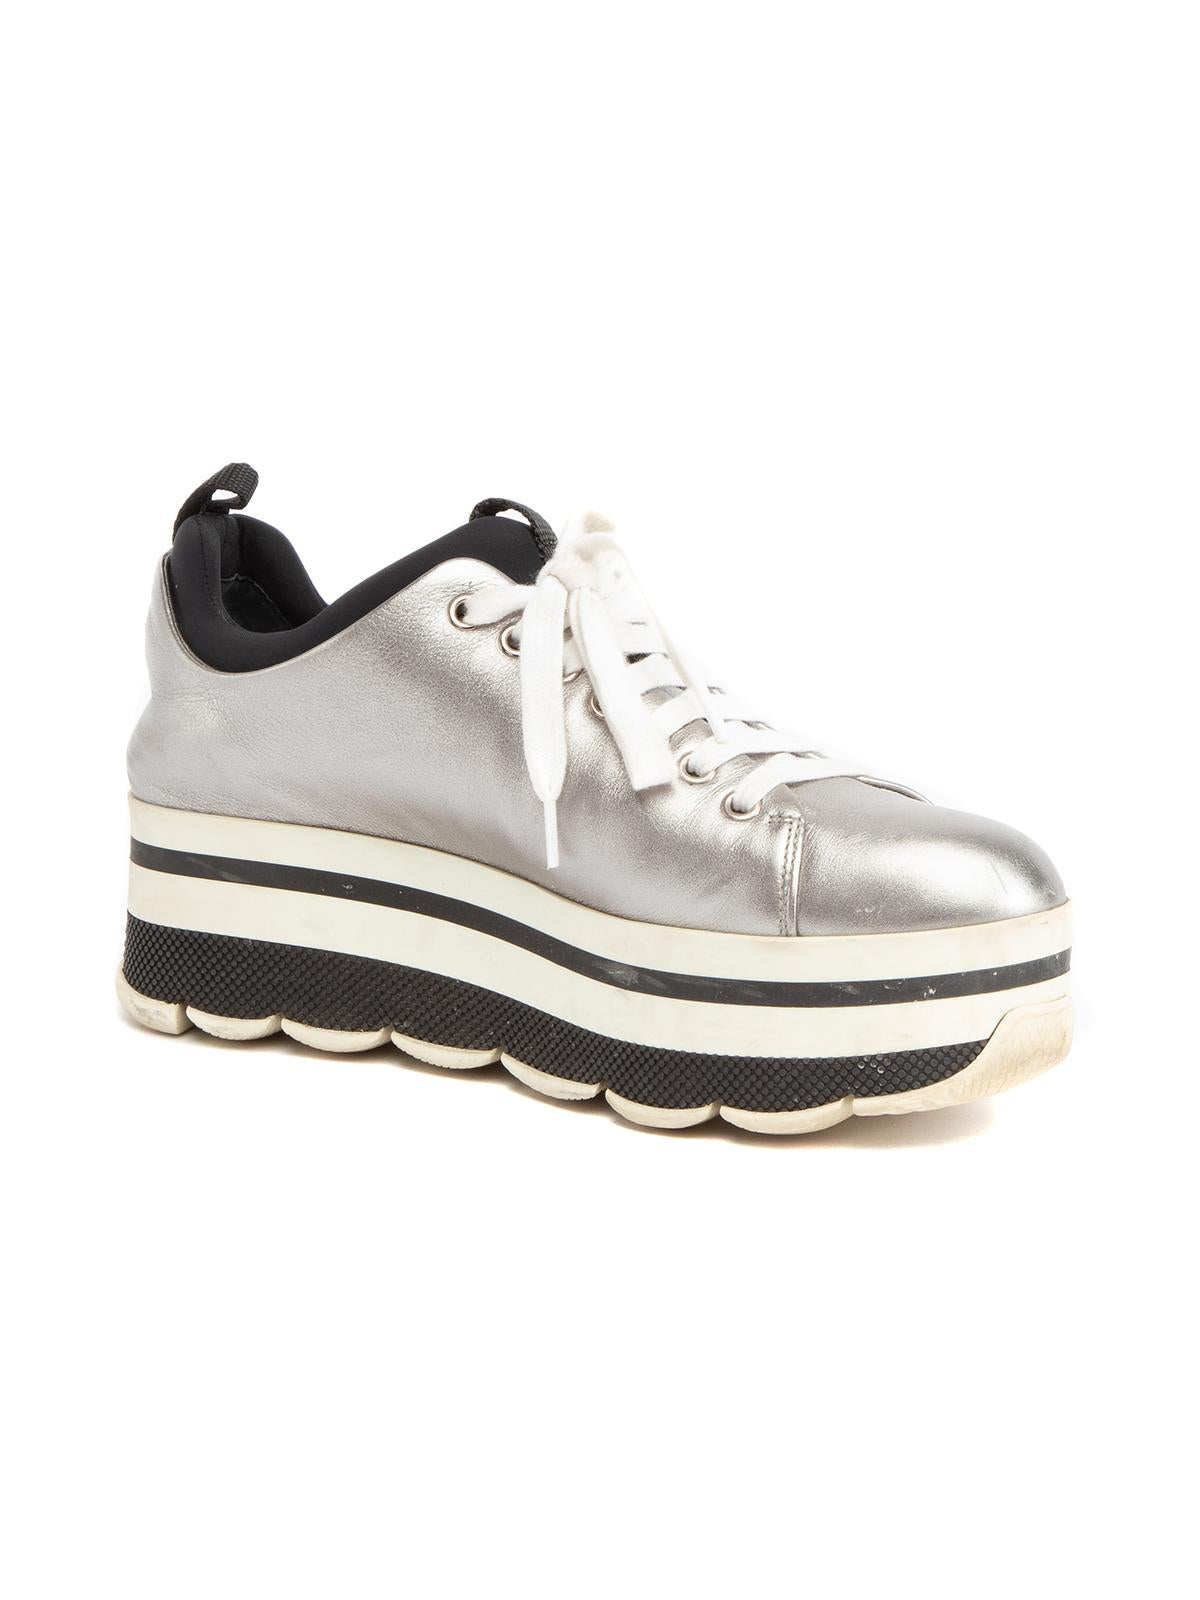 CONDITION is Very Good. Minimal wear to shoes is evident. Moderate signs of wear to midsole and slight scuffs around sneakers on this used Prada designer resale item. Details Silver Patent leather Lace up Flatform Round toe Made in Romania